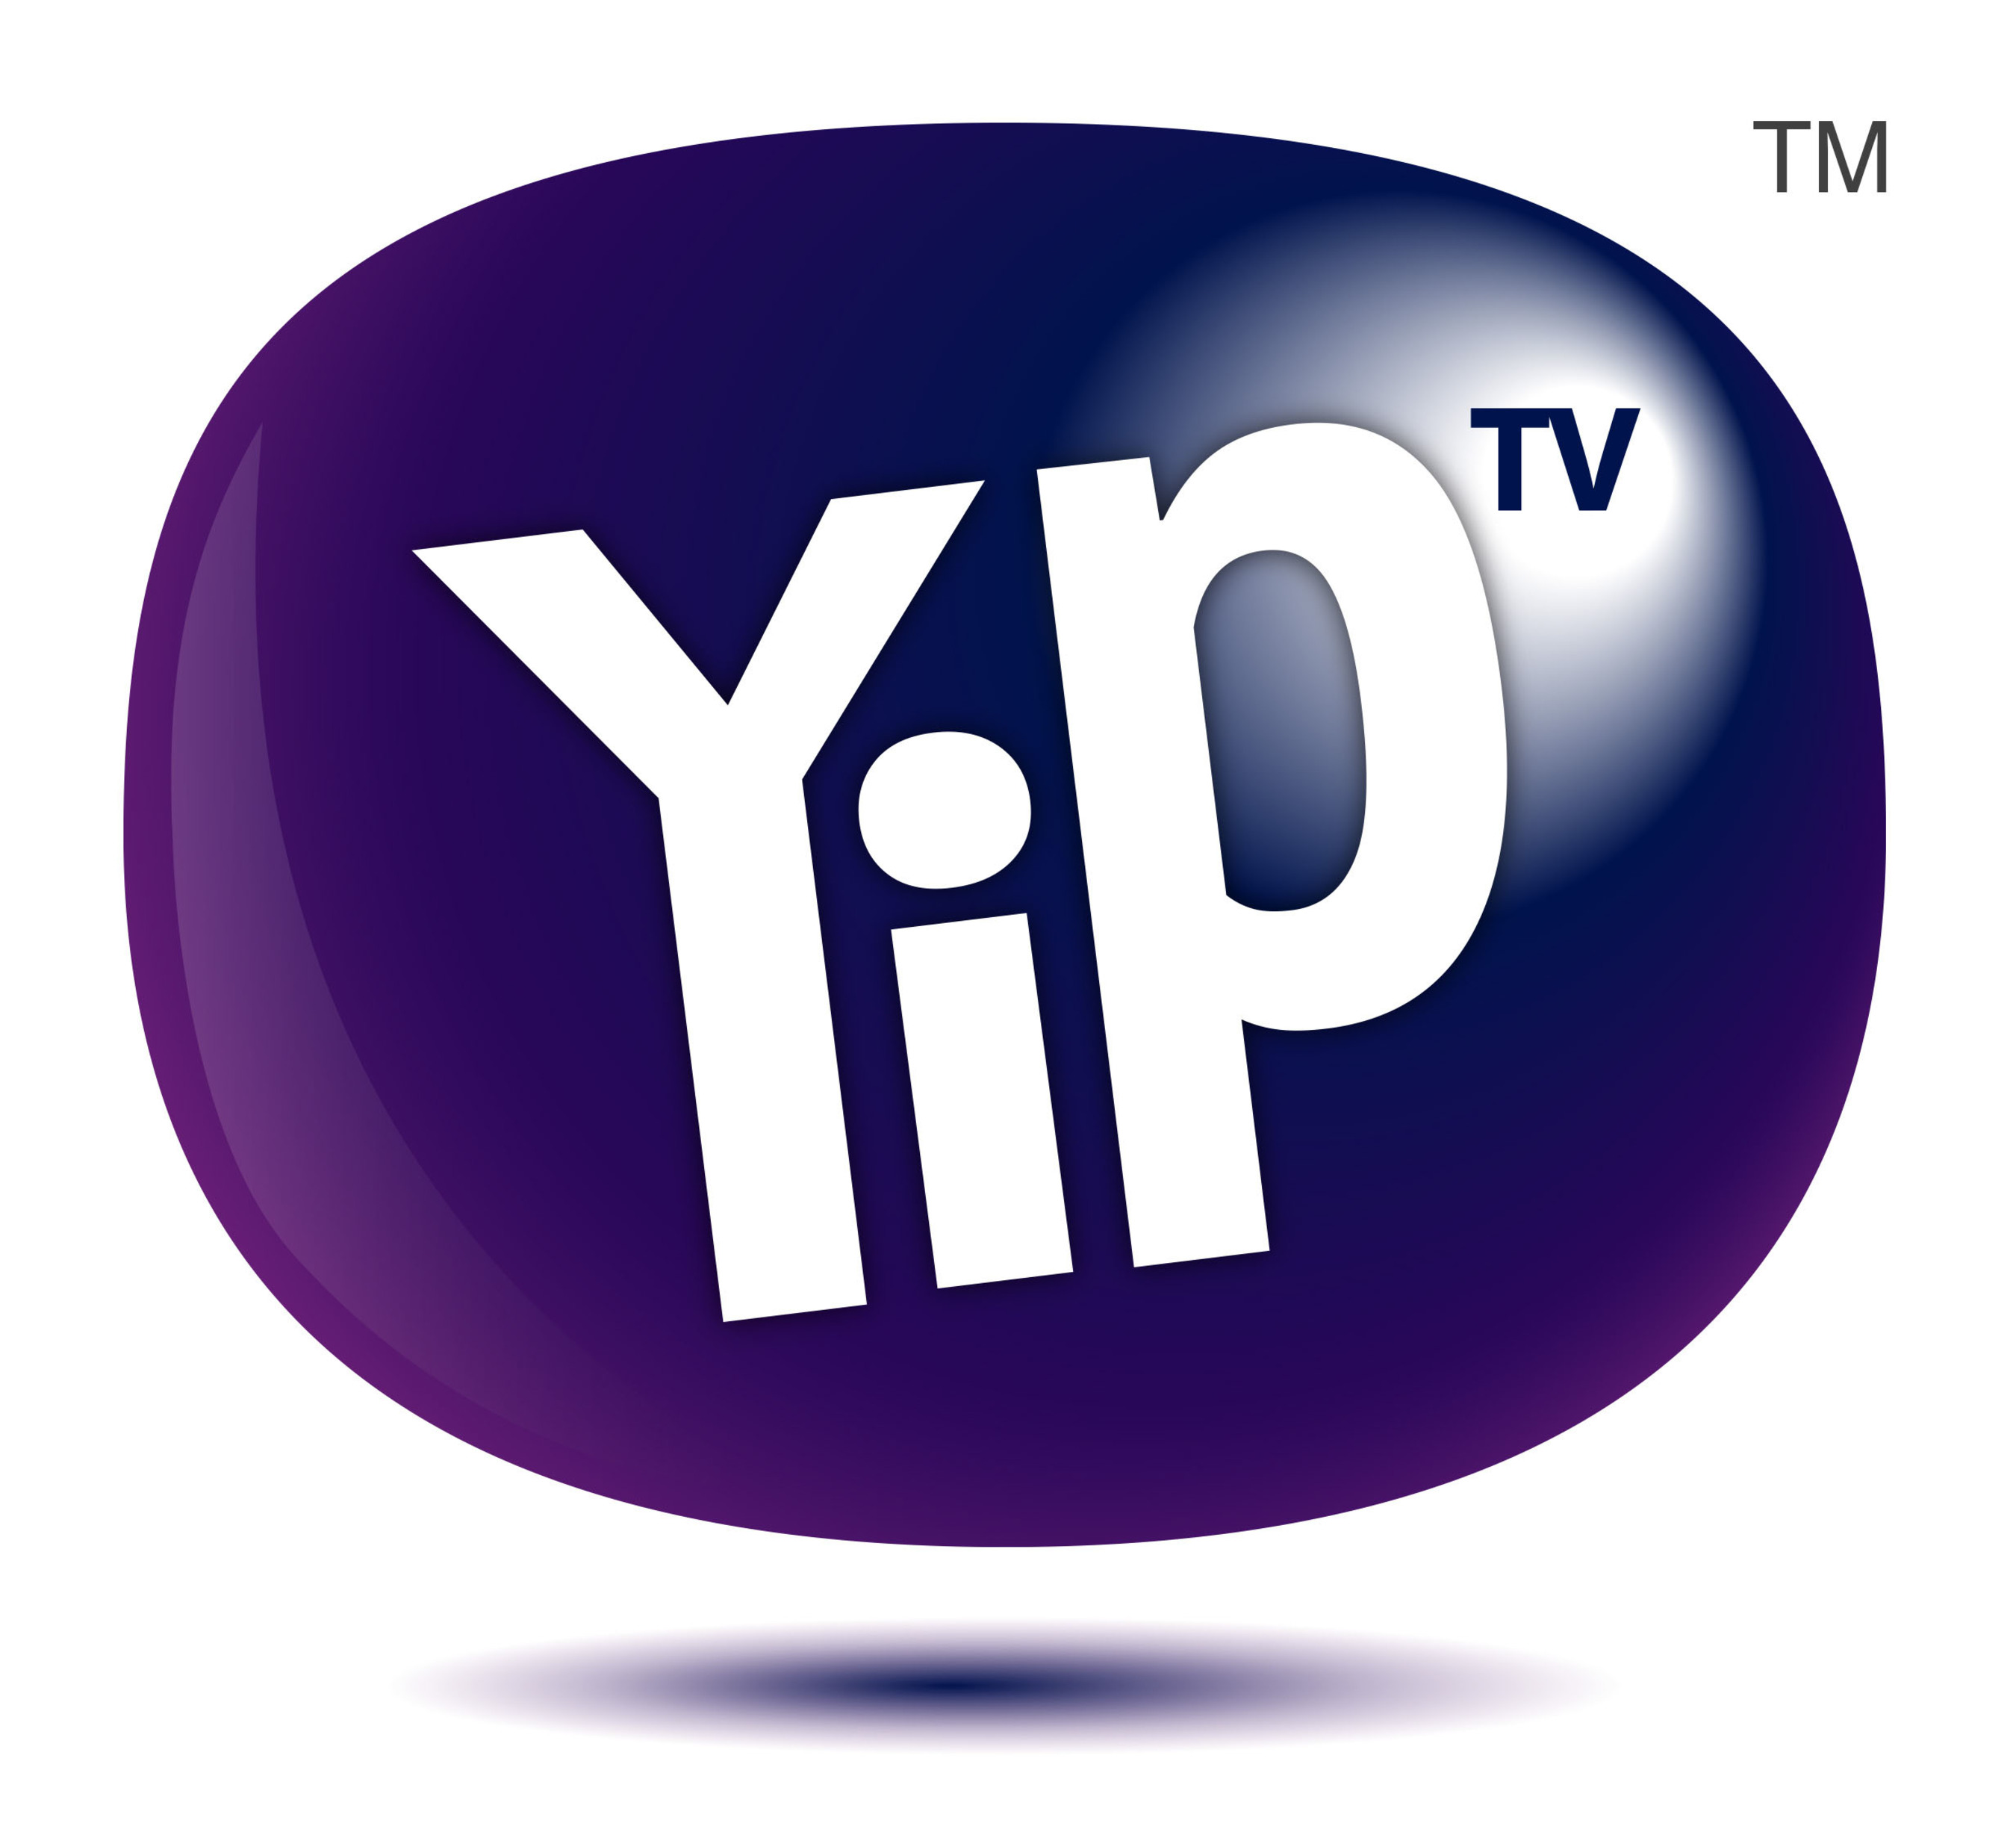 yiptv adds bein sports to stellar lineup of live channels aimed at